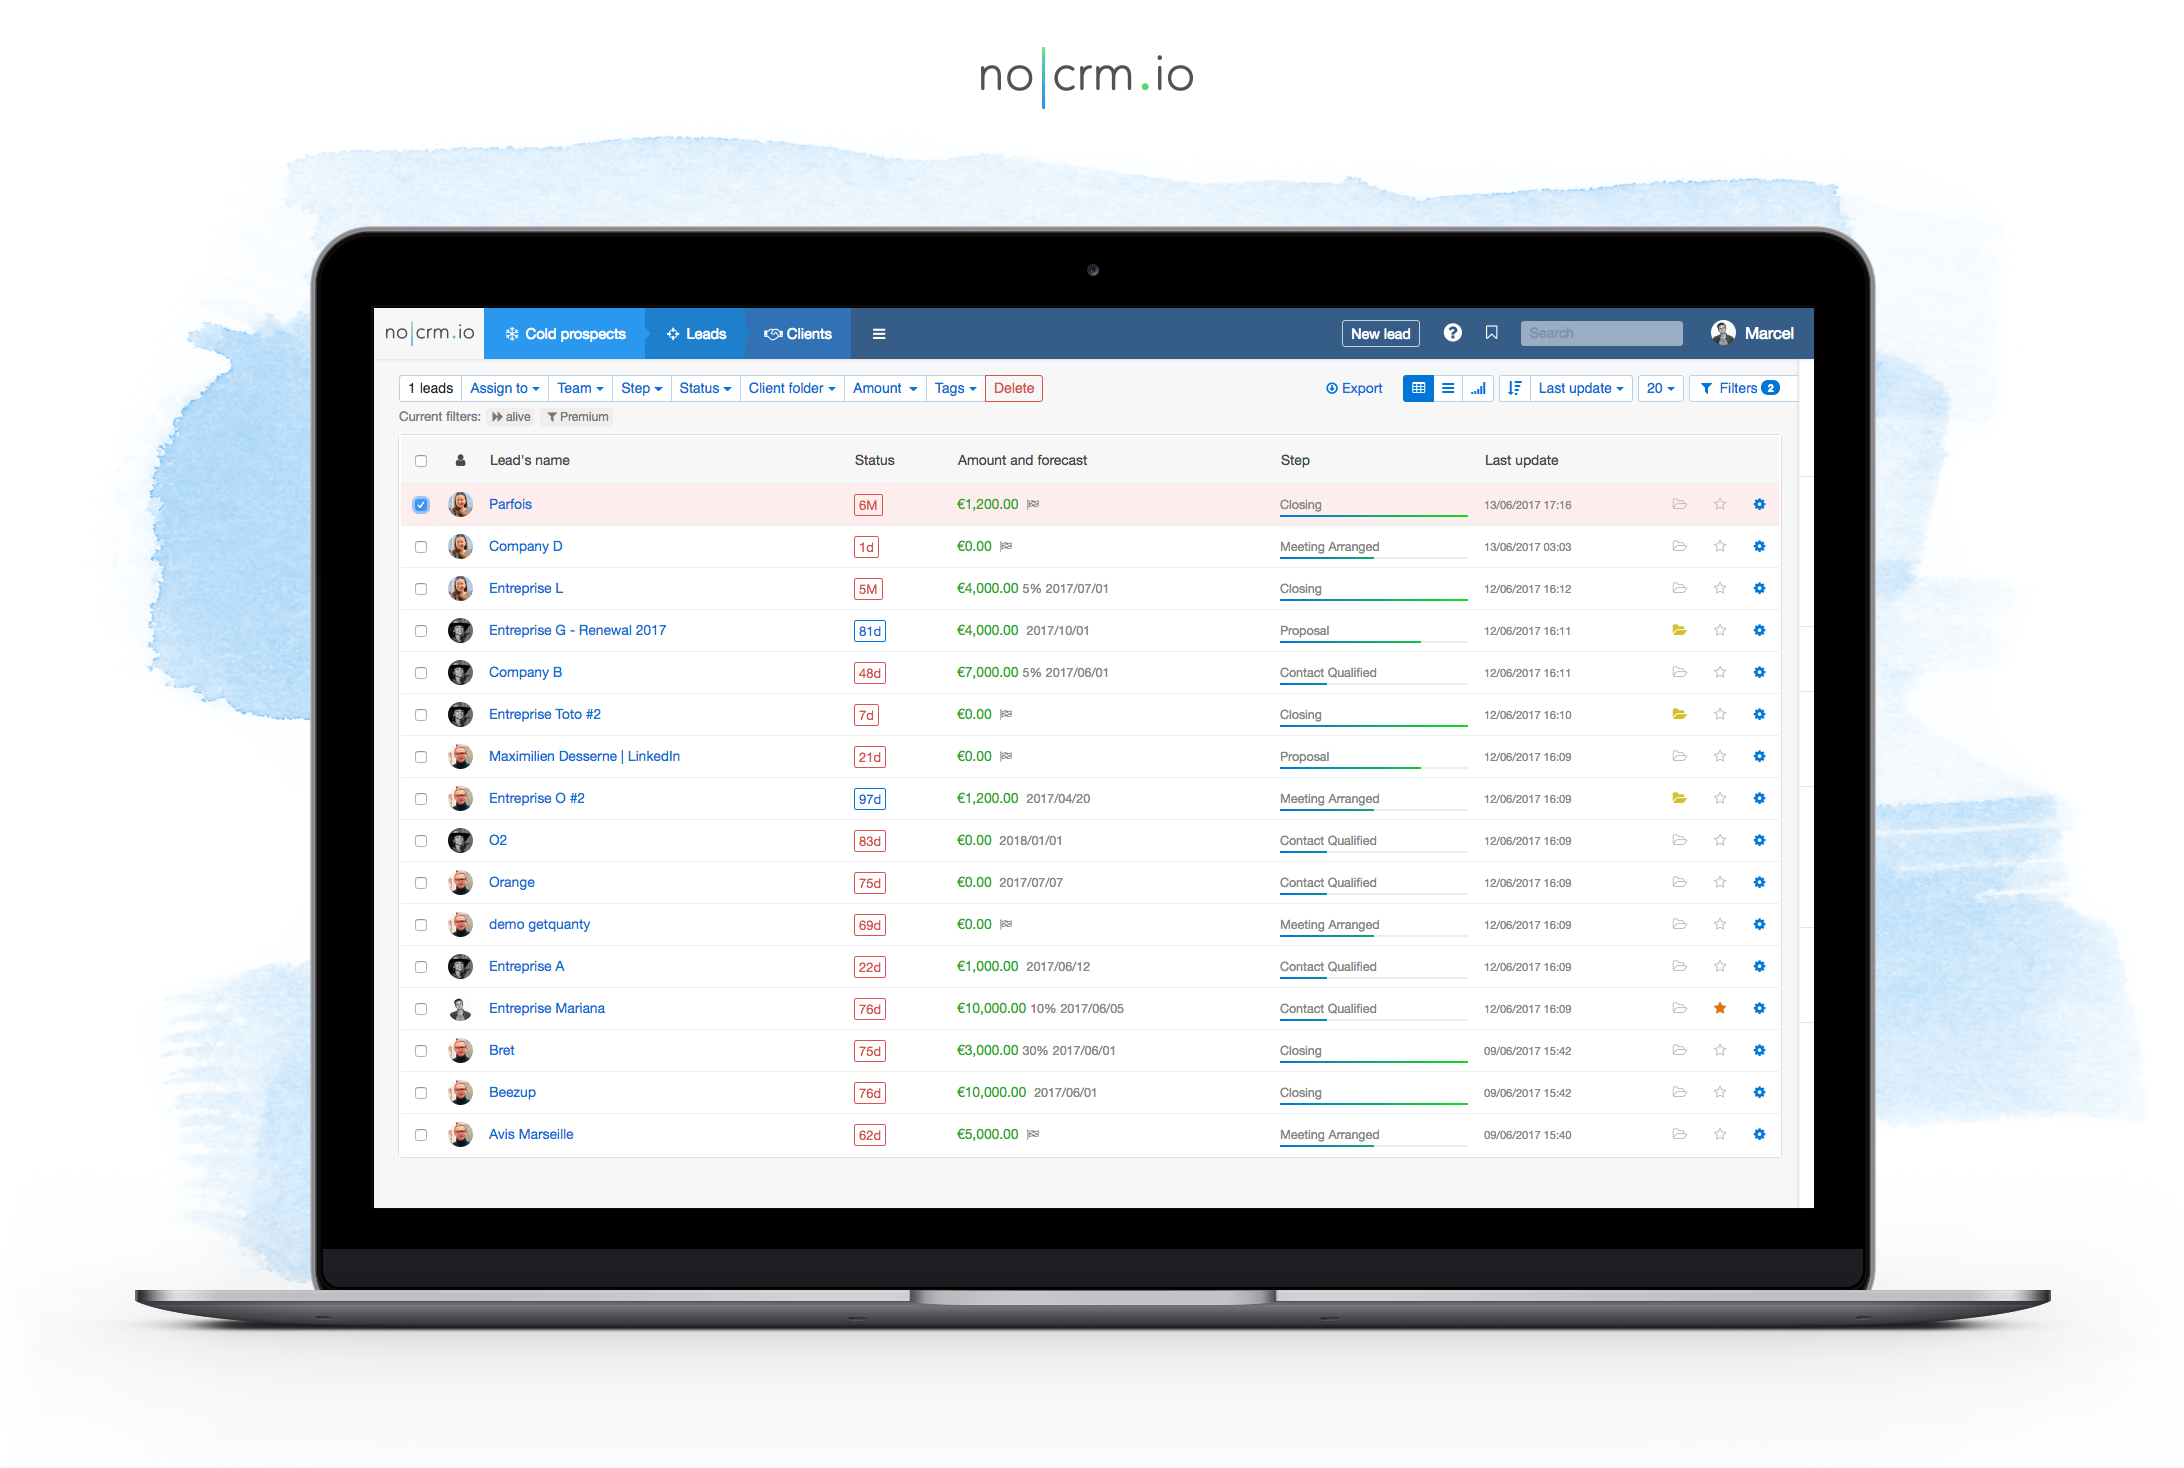 noCRM.io Software - See a compact view of lead names, status, and updates